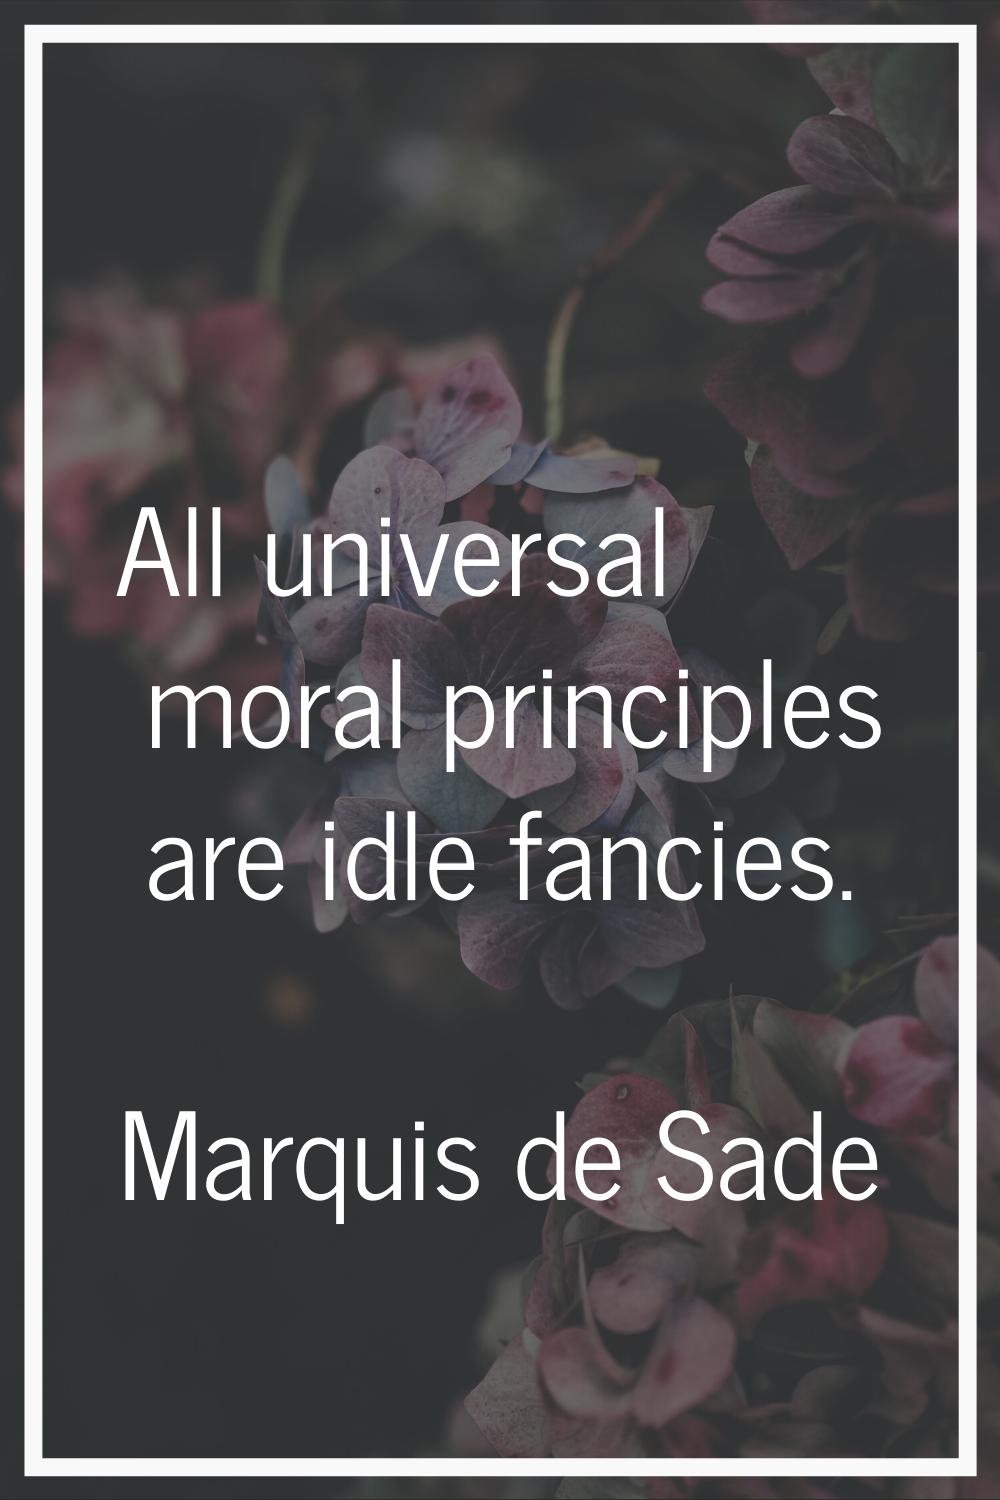 All universal moral principles are idle fancies.